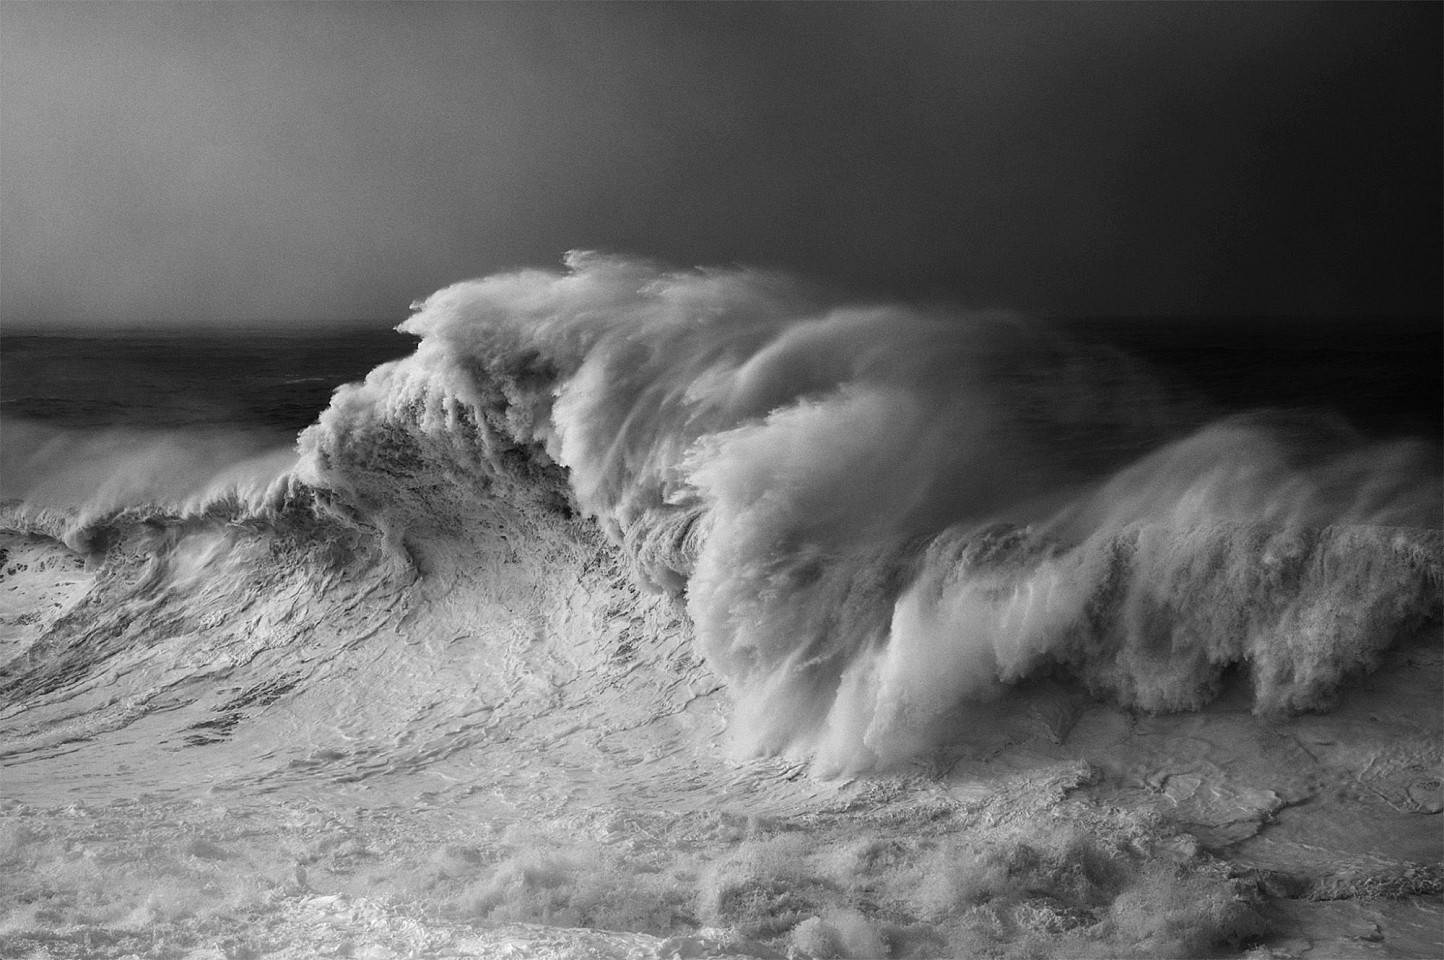 Alessandro Puccinelli, Mare 411; edition of 3, 2019
Archival pigment print, 47.25 x 70.75 in. paper / 56 x 79 in. framed (+$3,000 frame)
PUCI00003